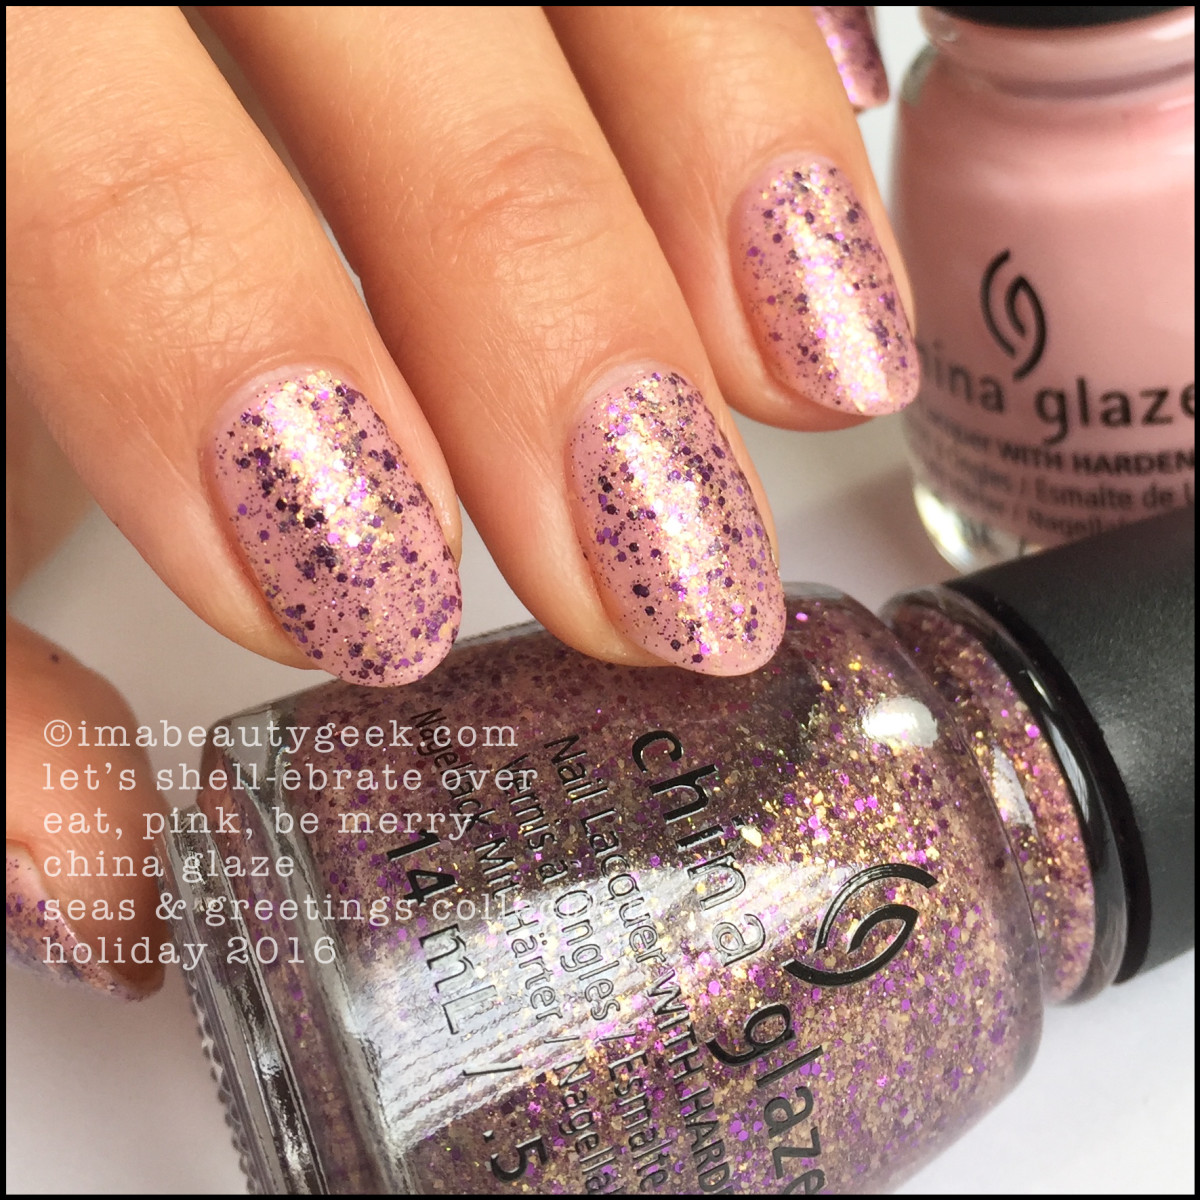 China Glaze Lets Shellebrate over_China Glaze Seas Greetings Holiday 2016 Swatches Review